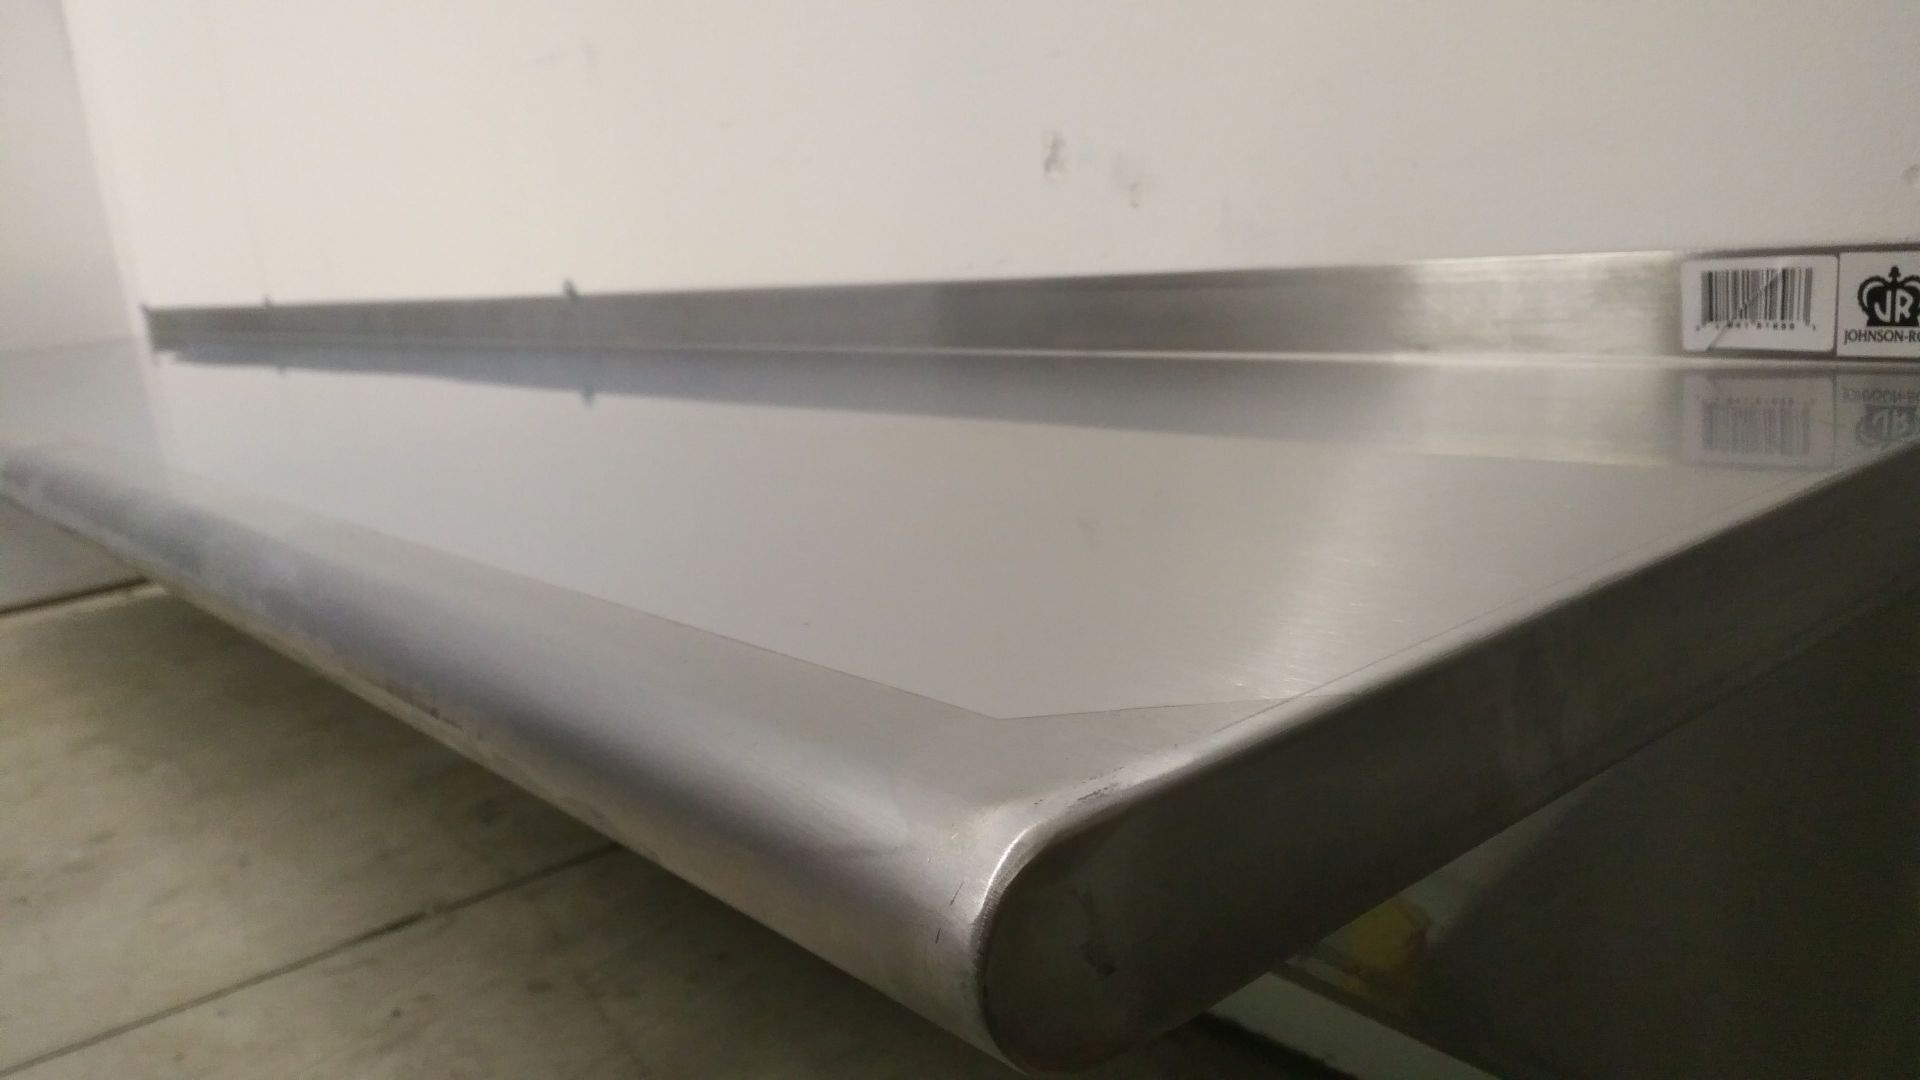 16" x 96" Stainless Wall Shelf - Image 2 of 3